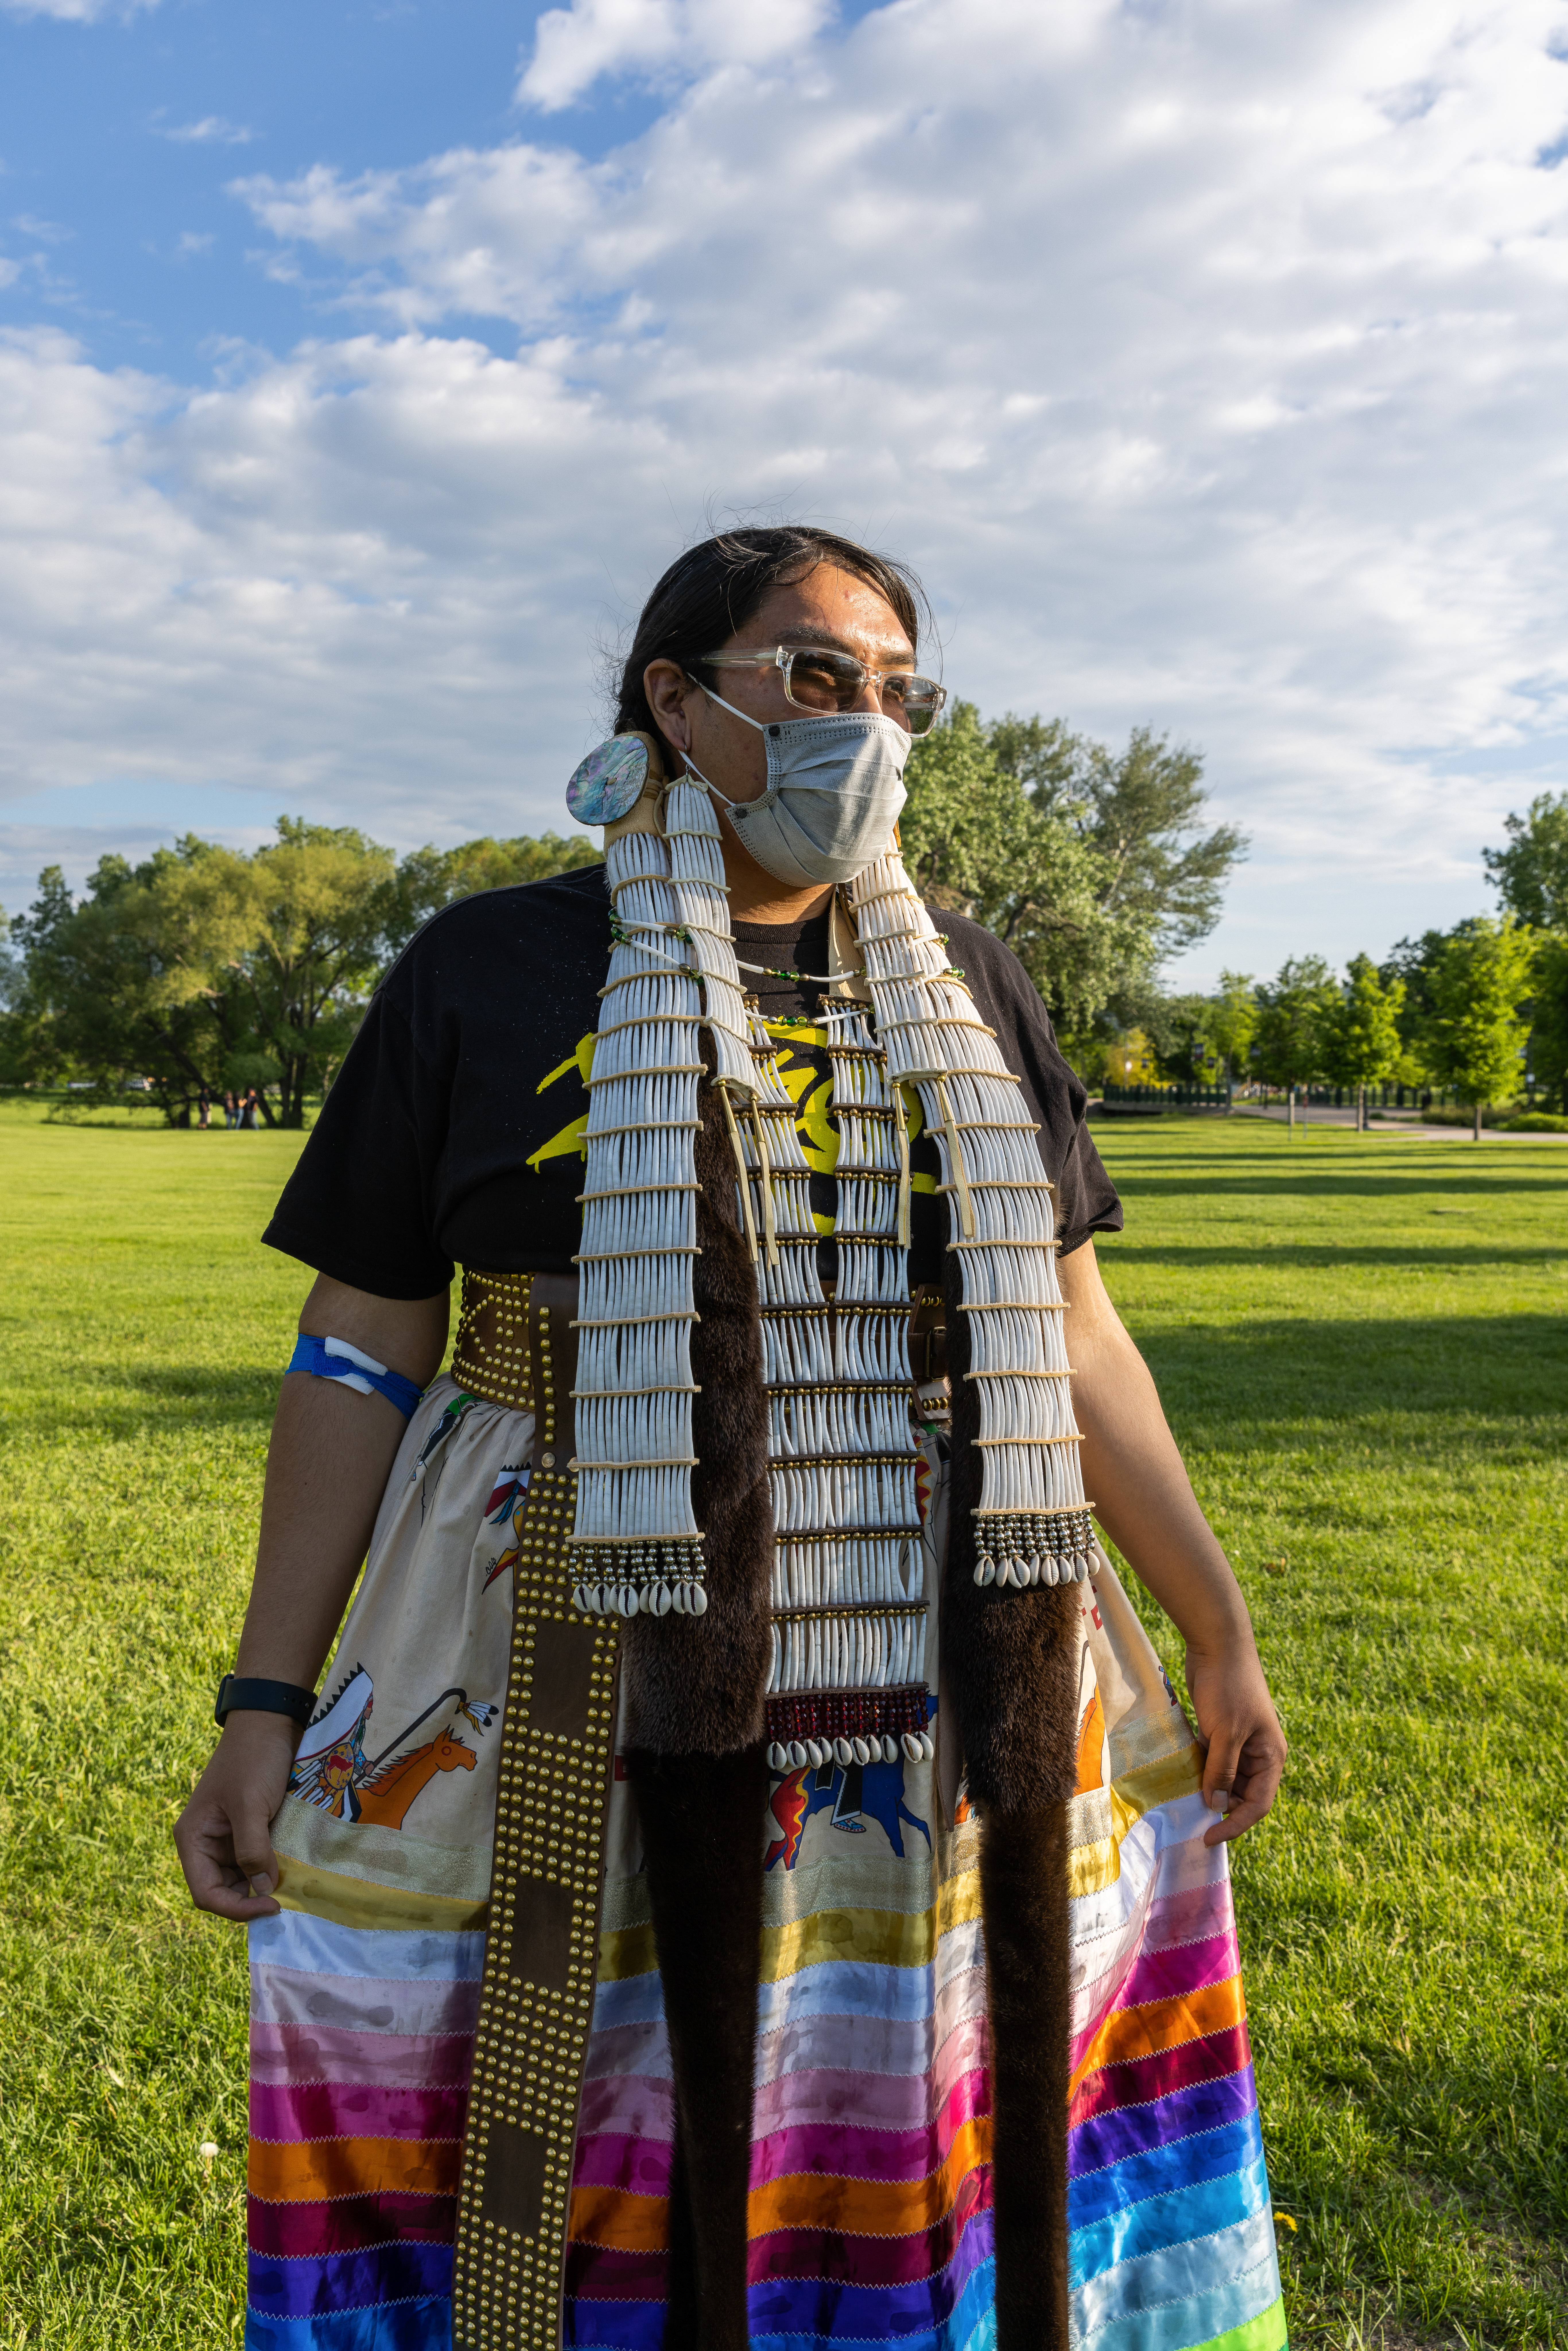 A person with medium-light skin tone wearing sunglasses, a cloth mask, and a beaded hairpiece and earrings, with a brown skirt and colorful skirt.